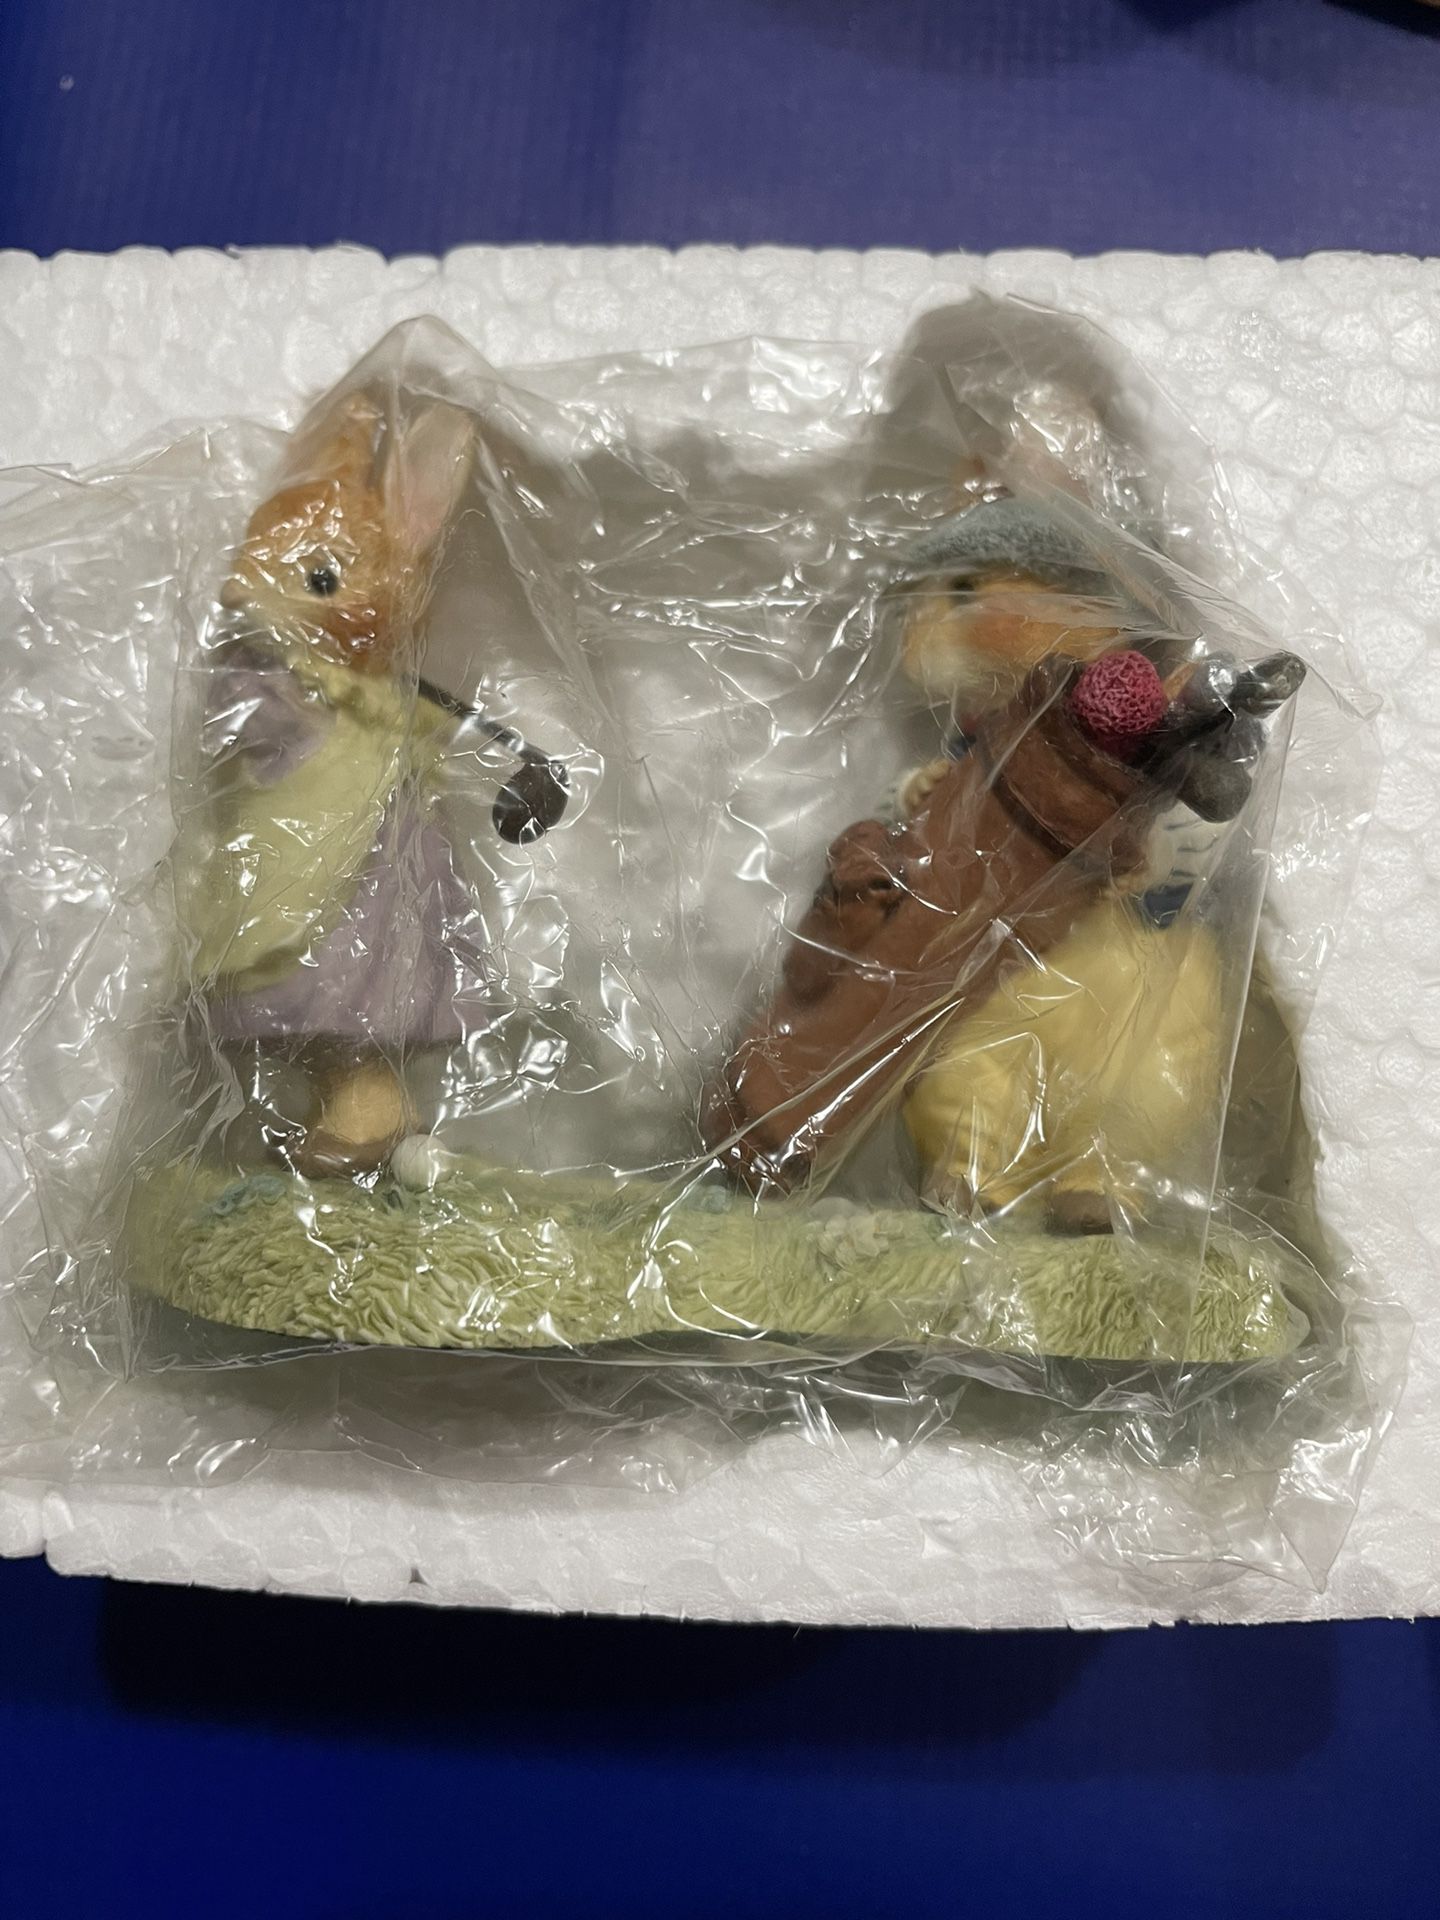 NEW Villeroy & Boch “Katie and Rue A Good Swing” Golf Figurine